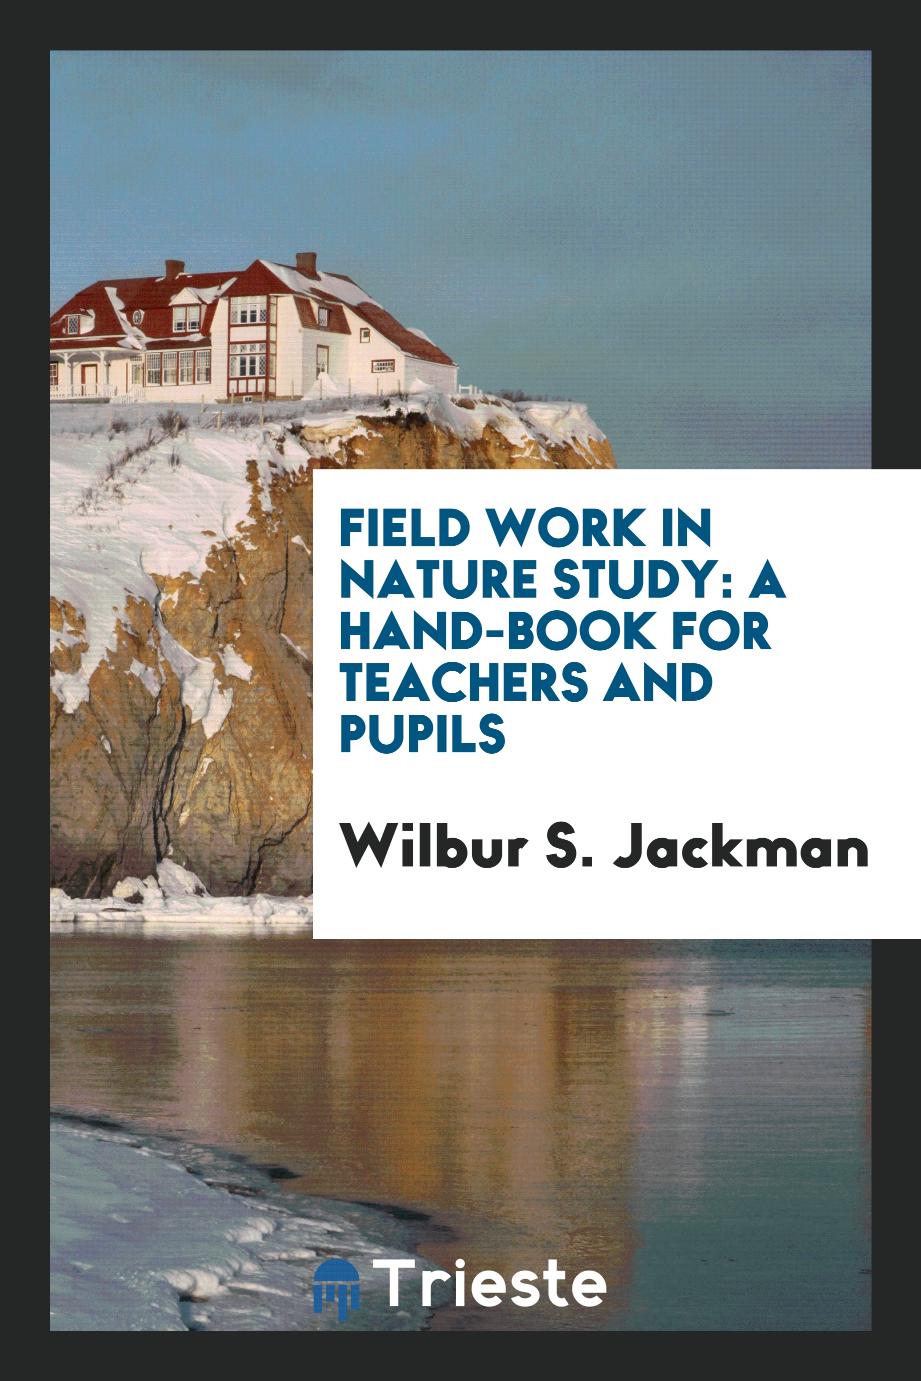 Field Work in Nature Study: A Hand-book for Teachers and Pupils